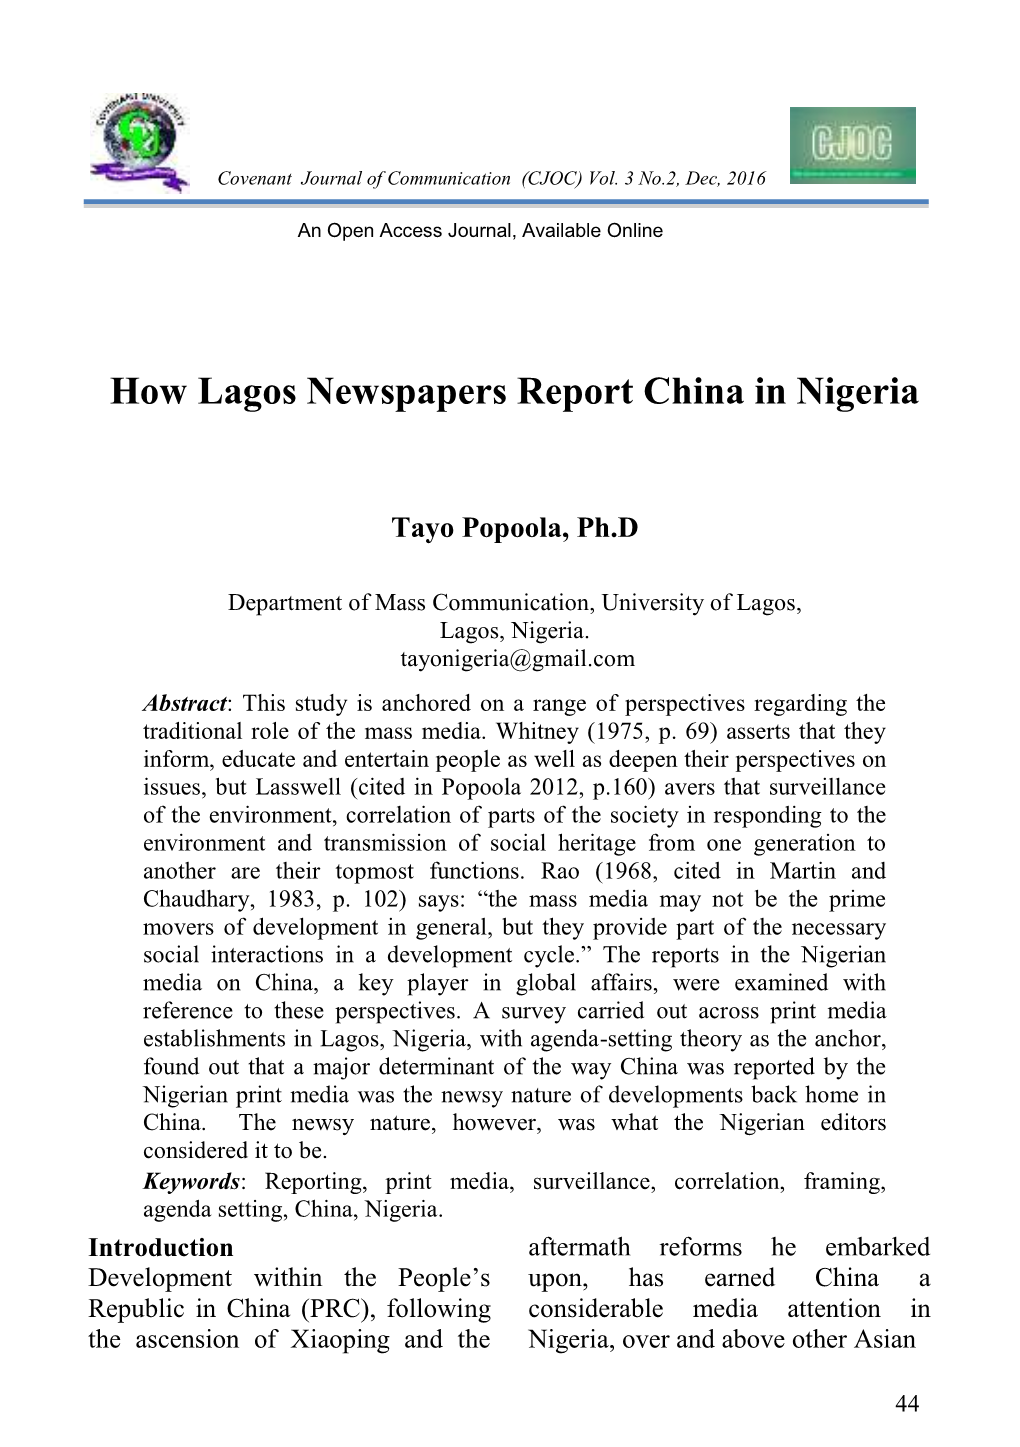 How Lagos Newspapers Report China in Nigeria